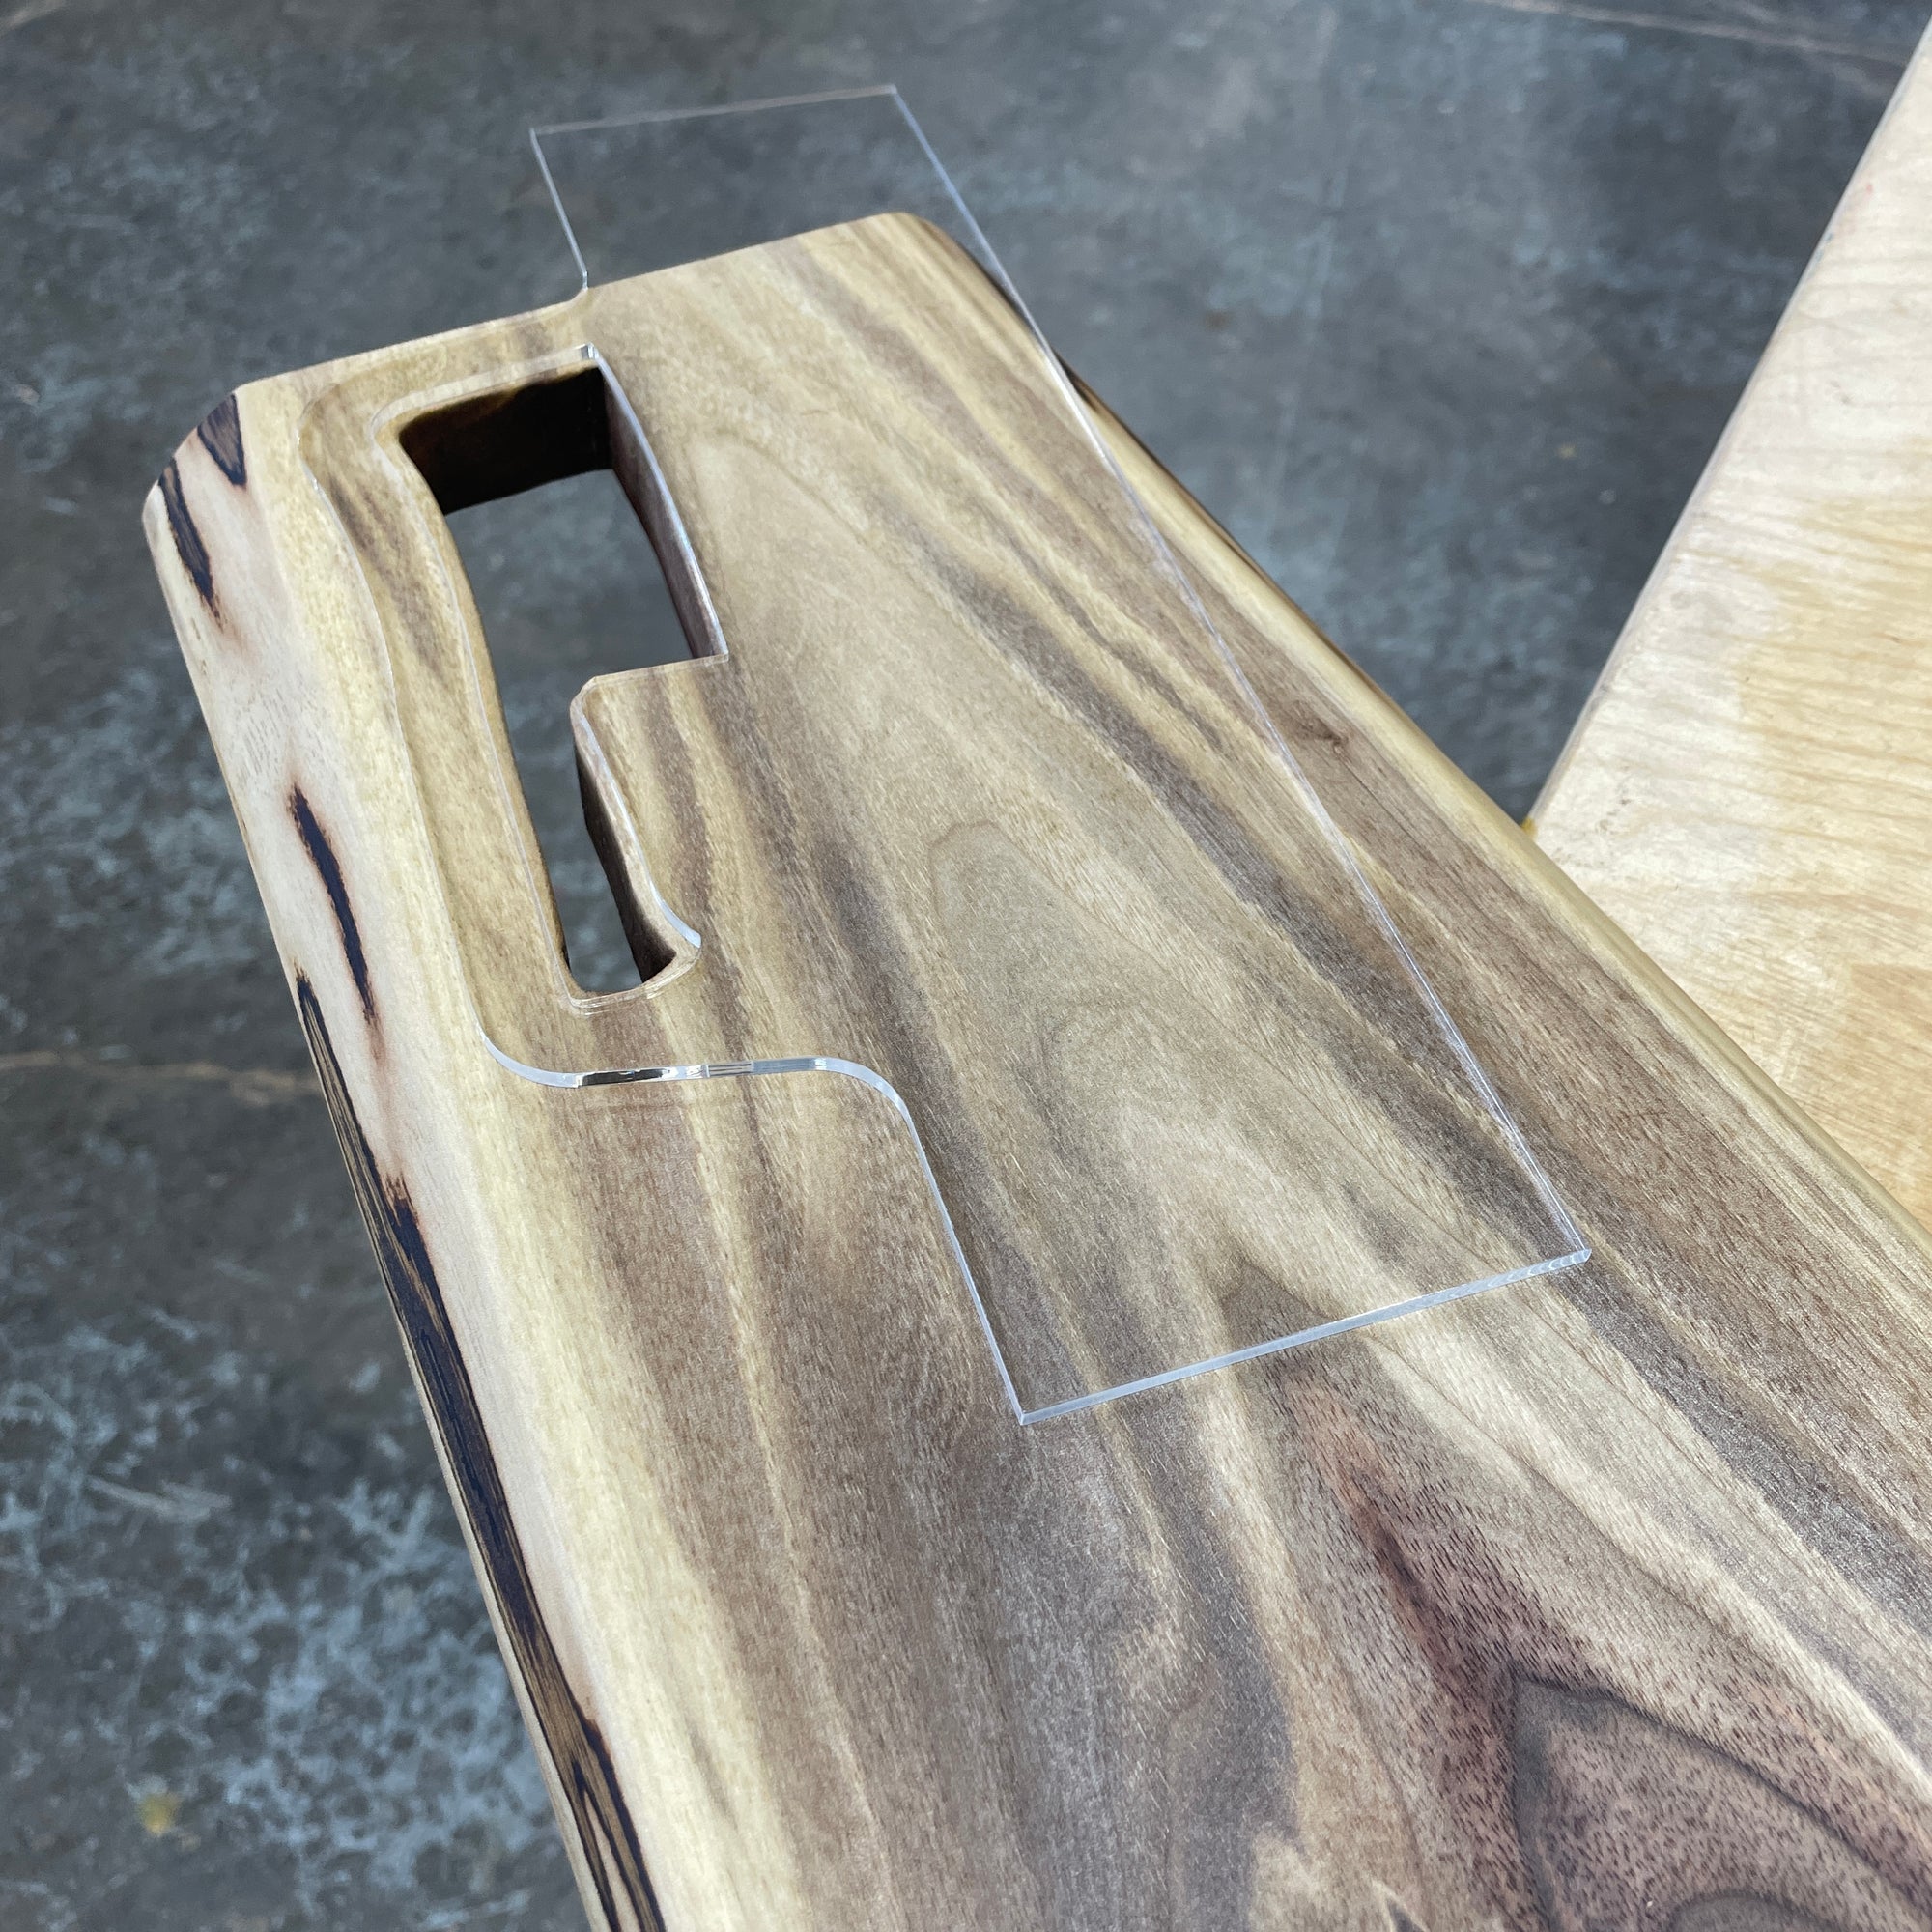 Cleaver Handle Router Template